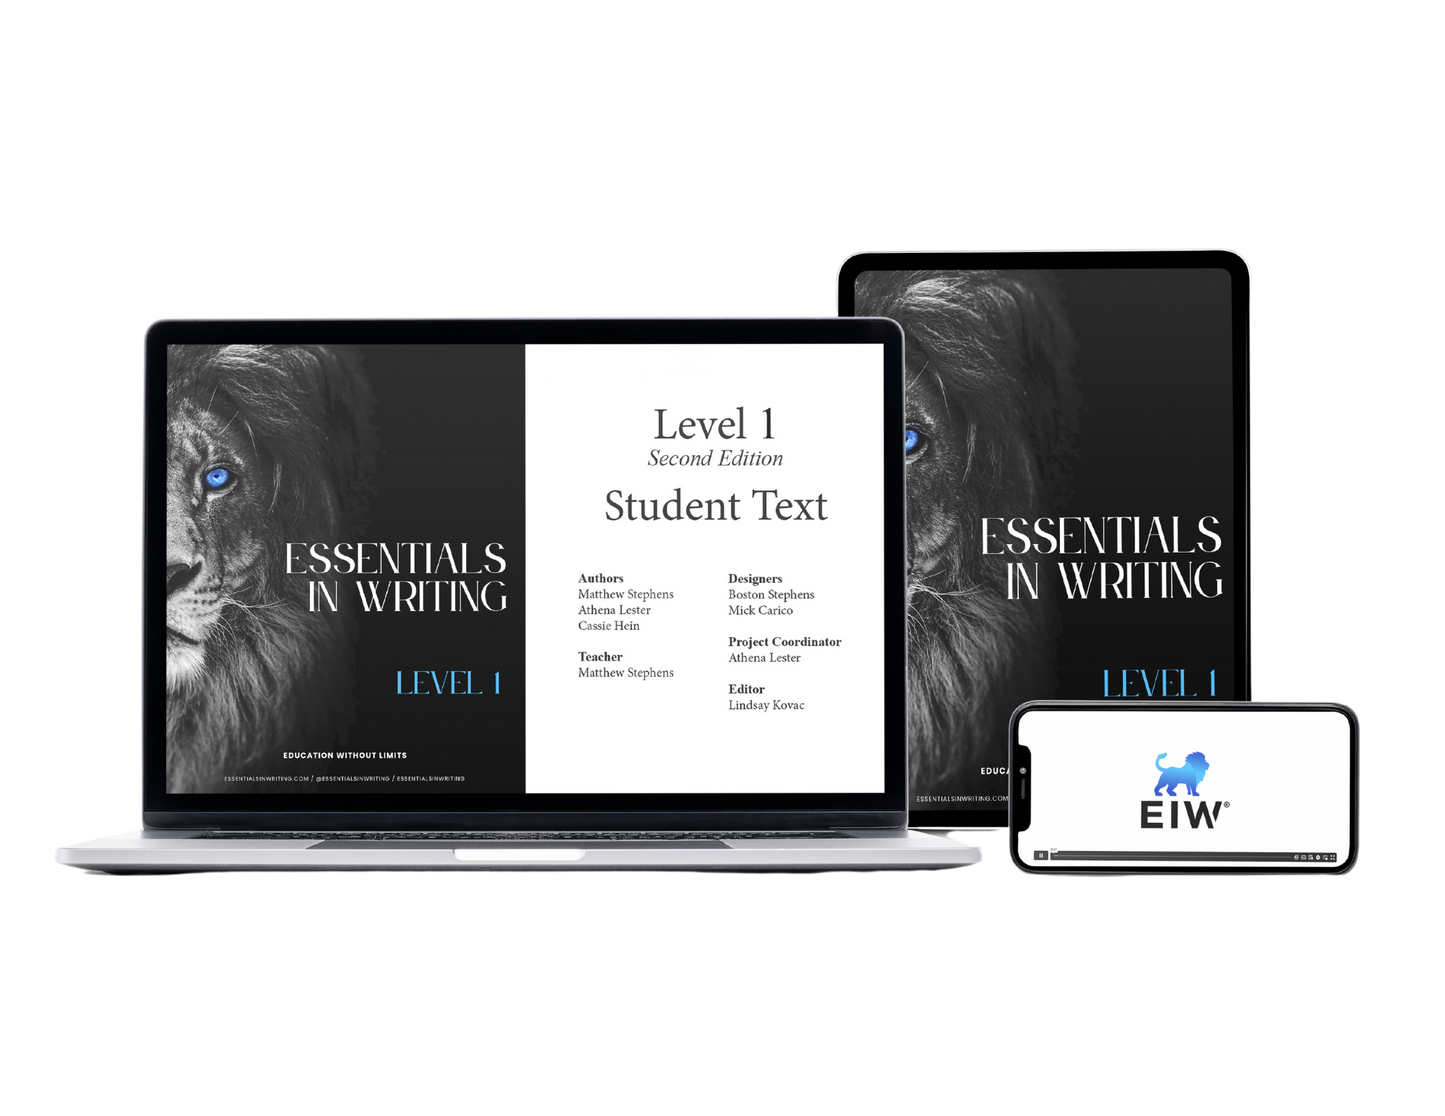 Essentials in Writing Level 1 Second Edition